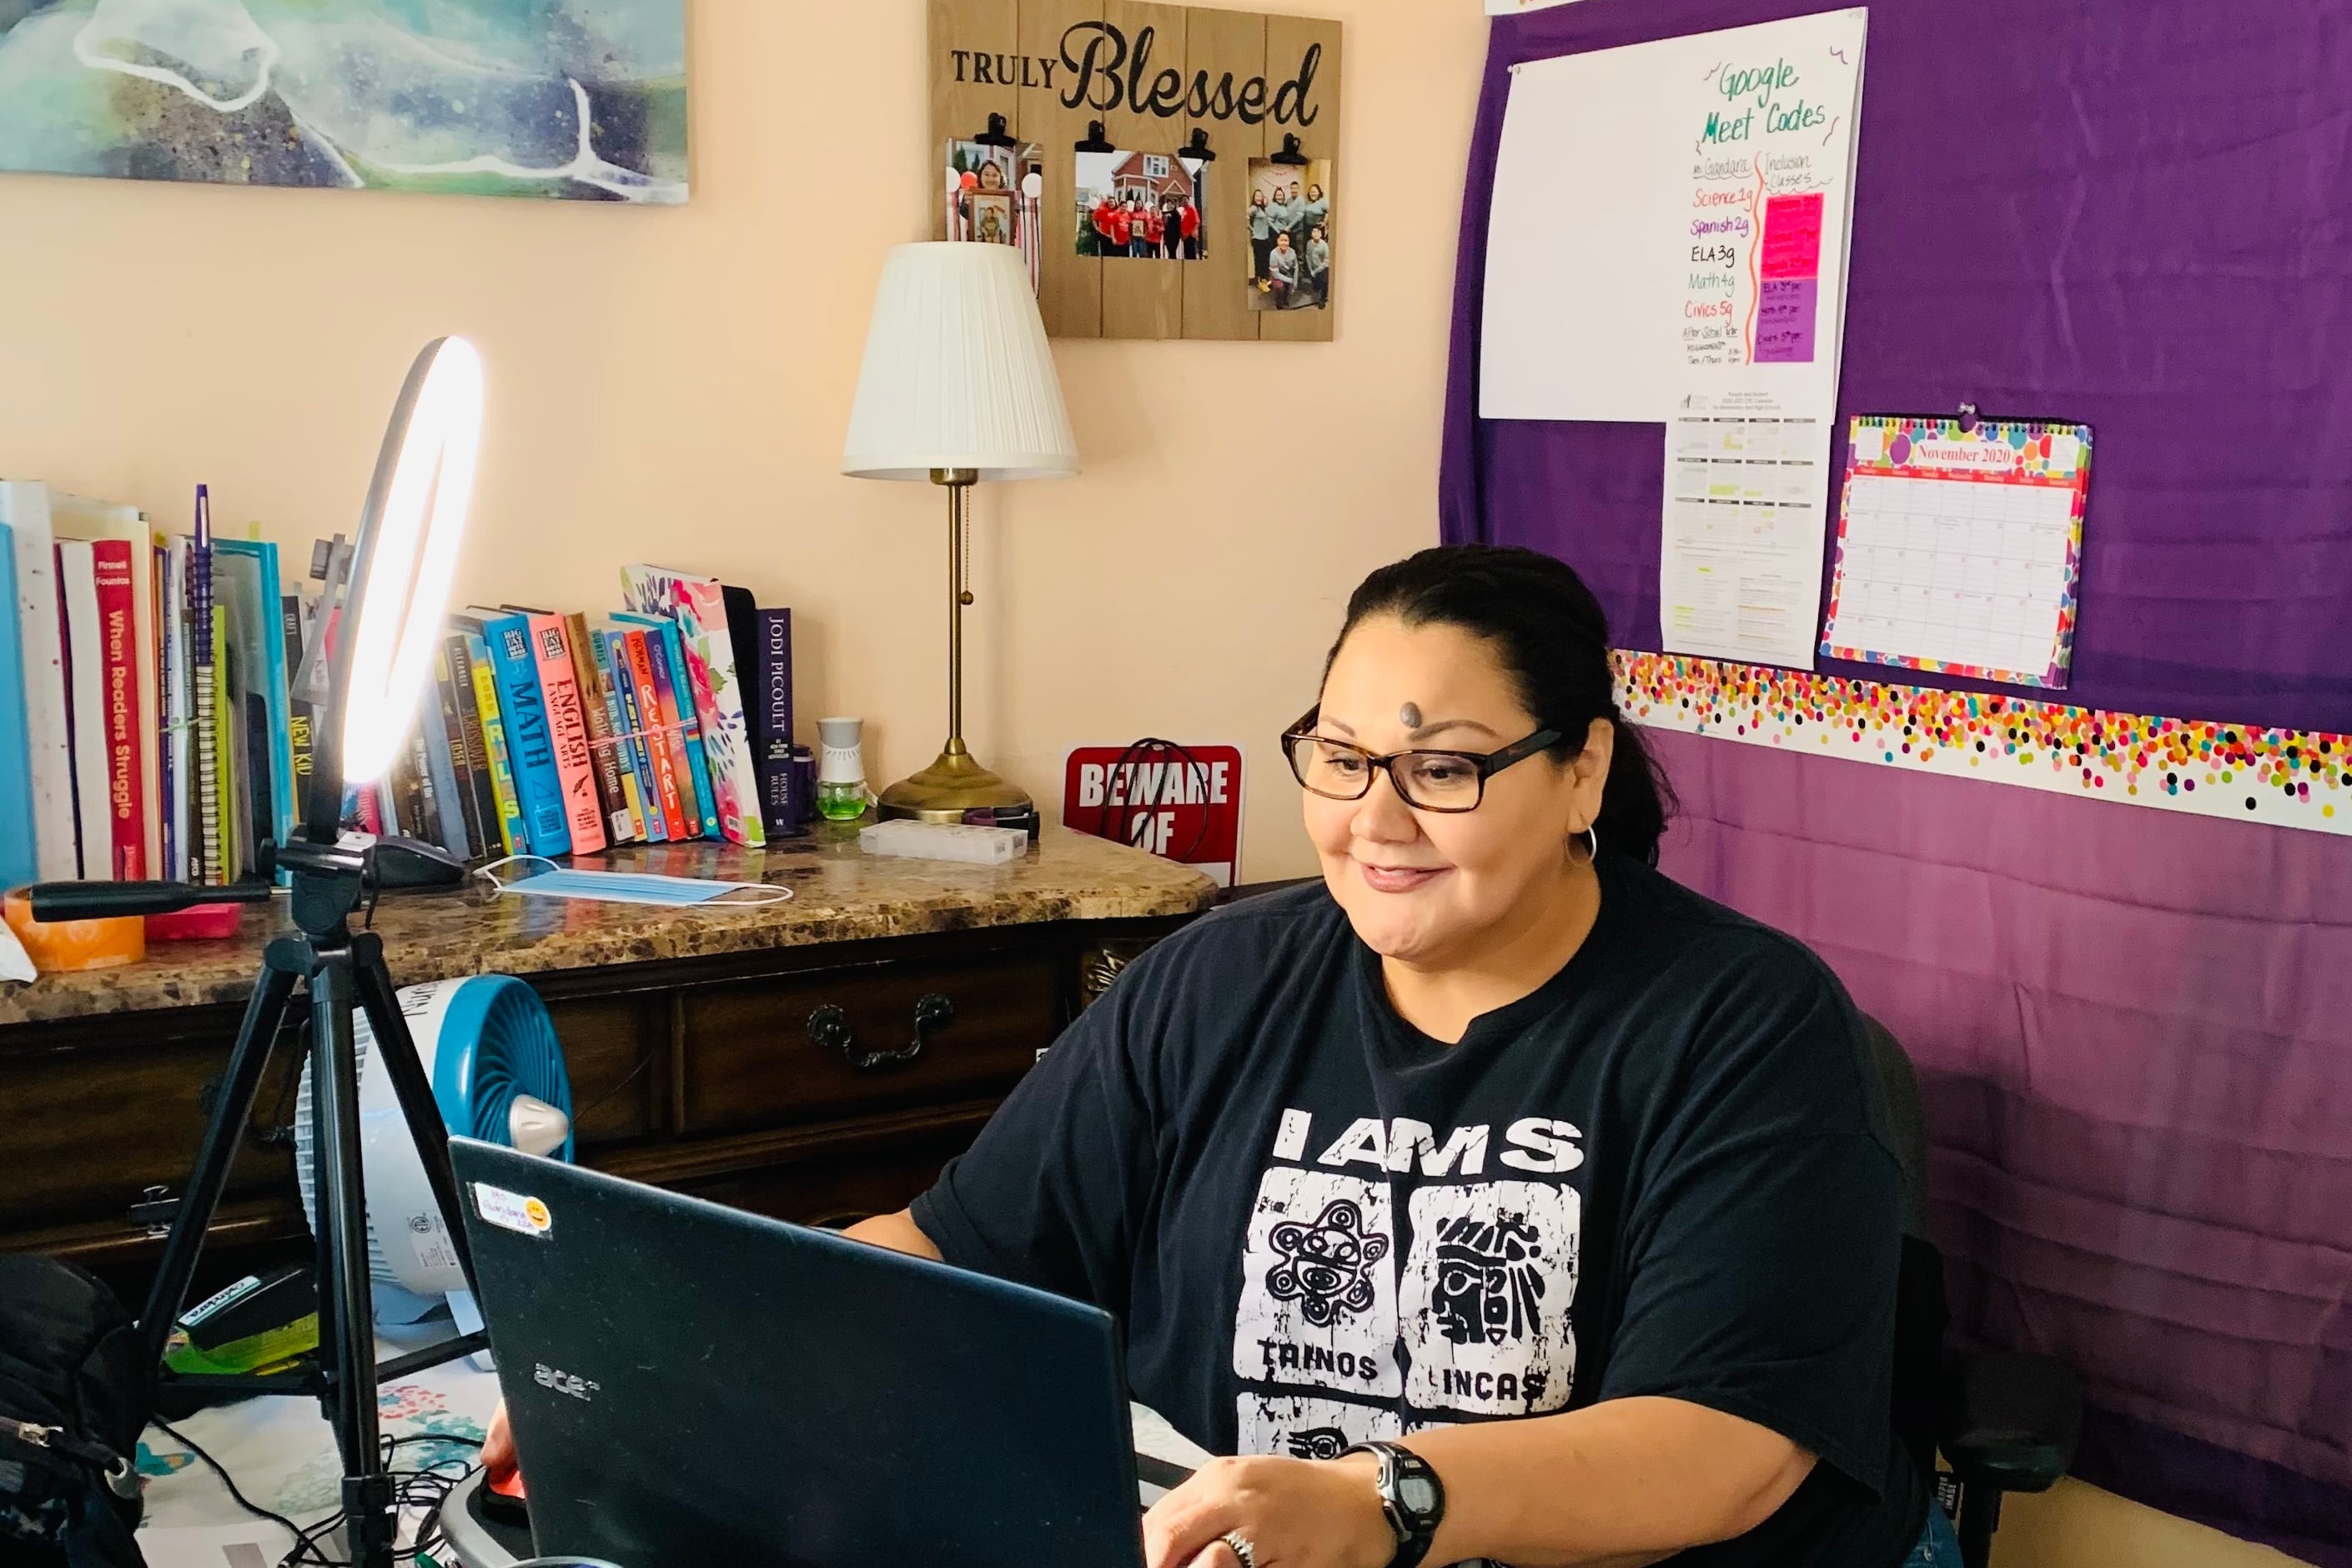 Maria Gándara, a bilingual middle school special education teacher at Edwards Elementary on Chicago’s Southwest Side, has worked to engage her students during a year of teaching remotely.